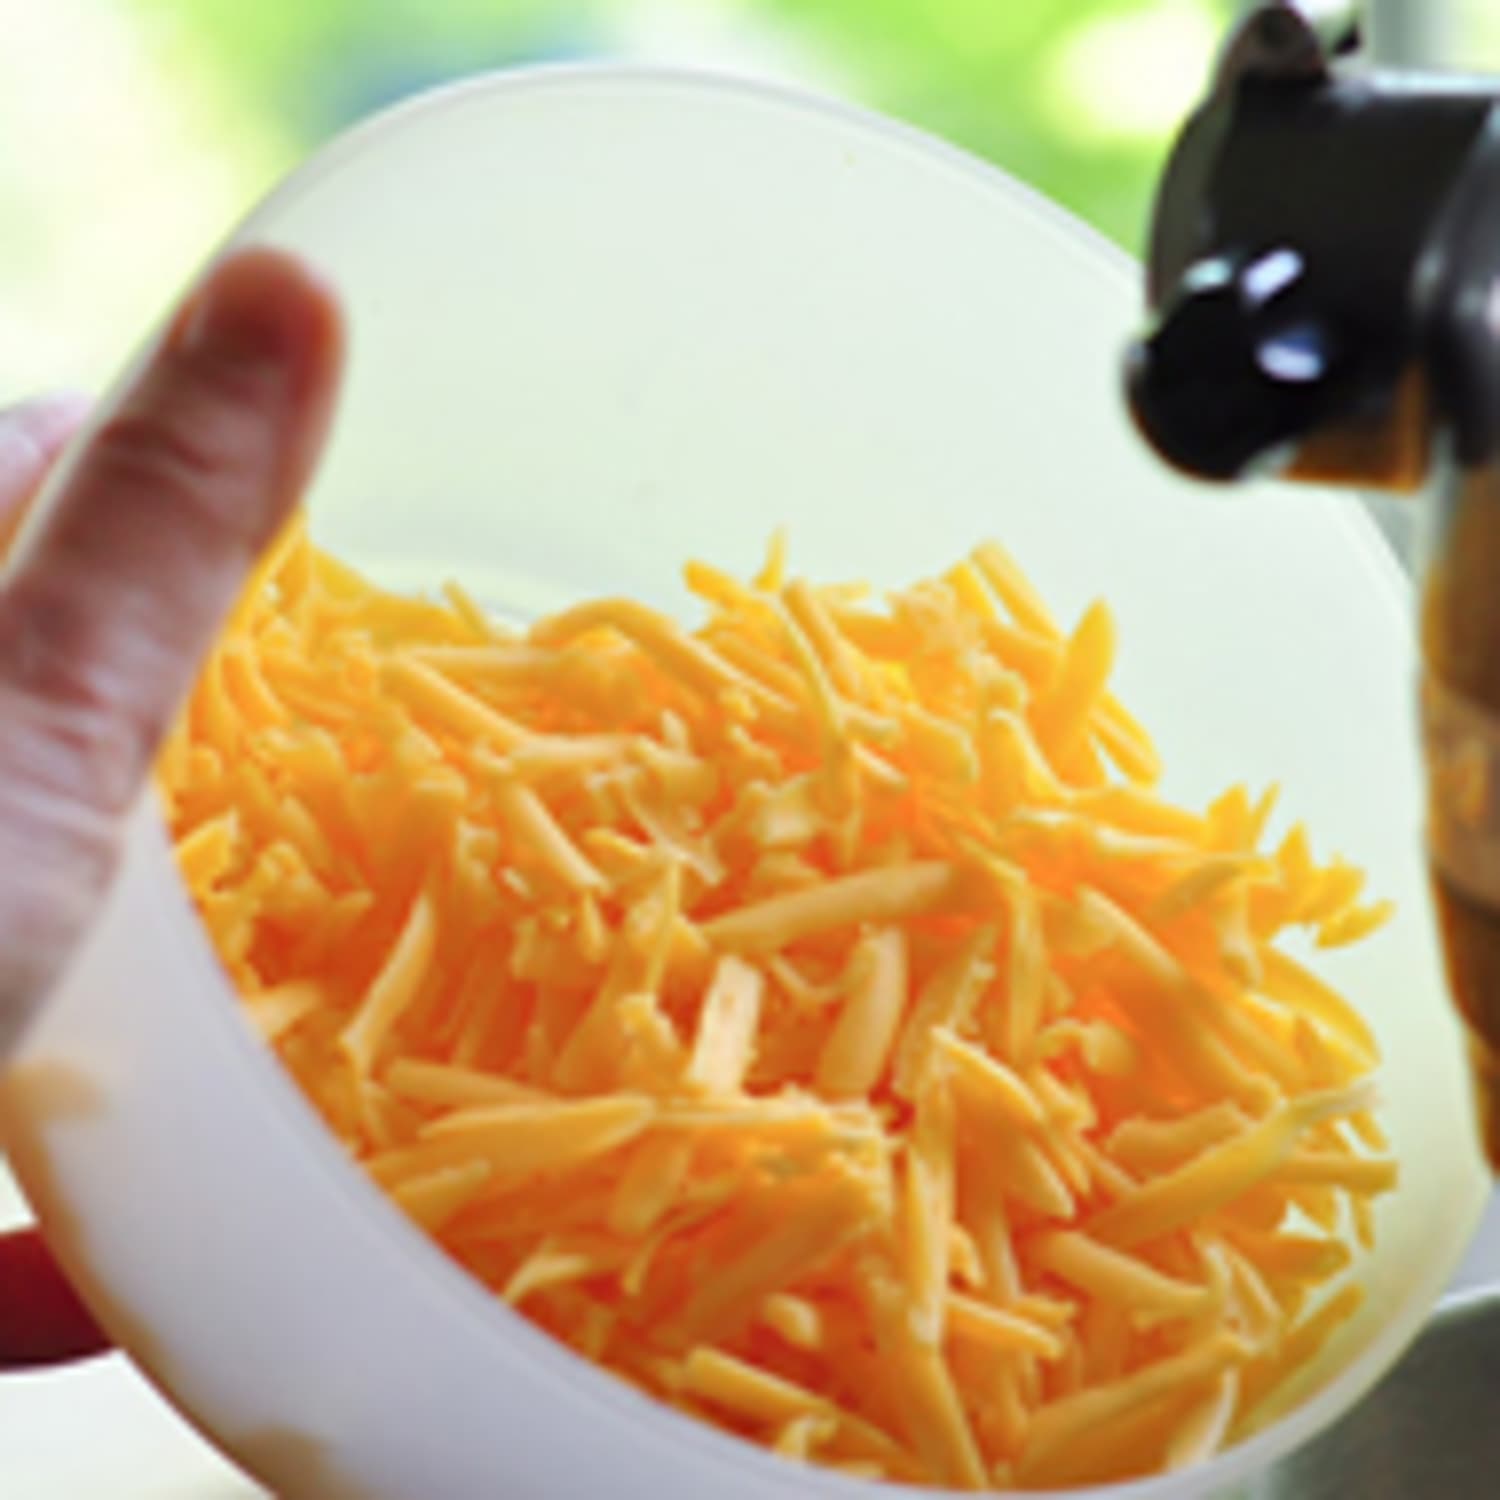 How to Grate or Shred Cheese Without Making a Mess, According to a Recipe  Developer